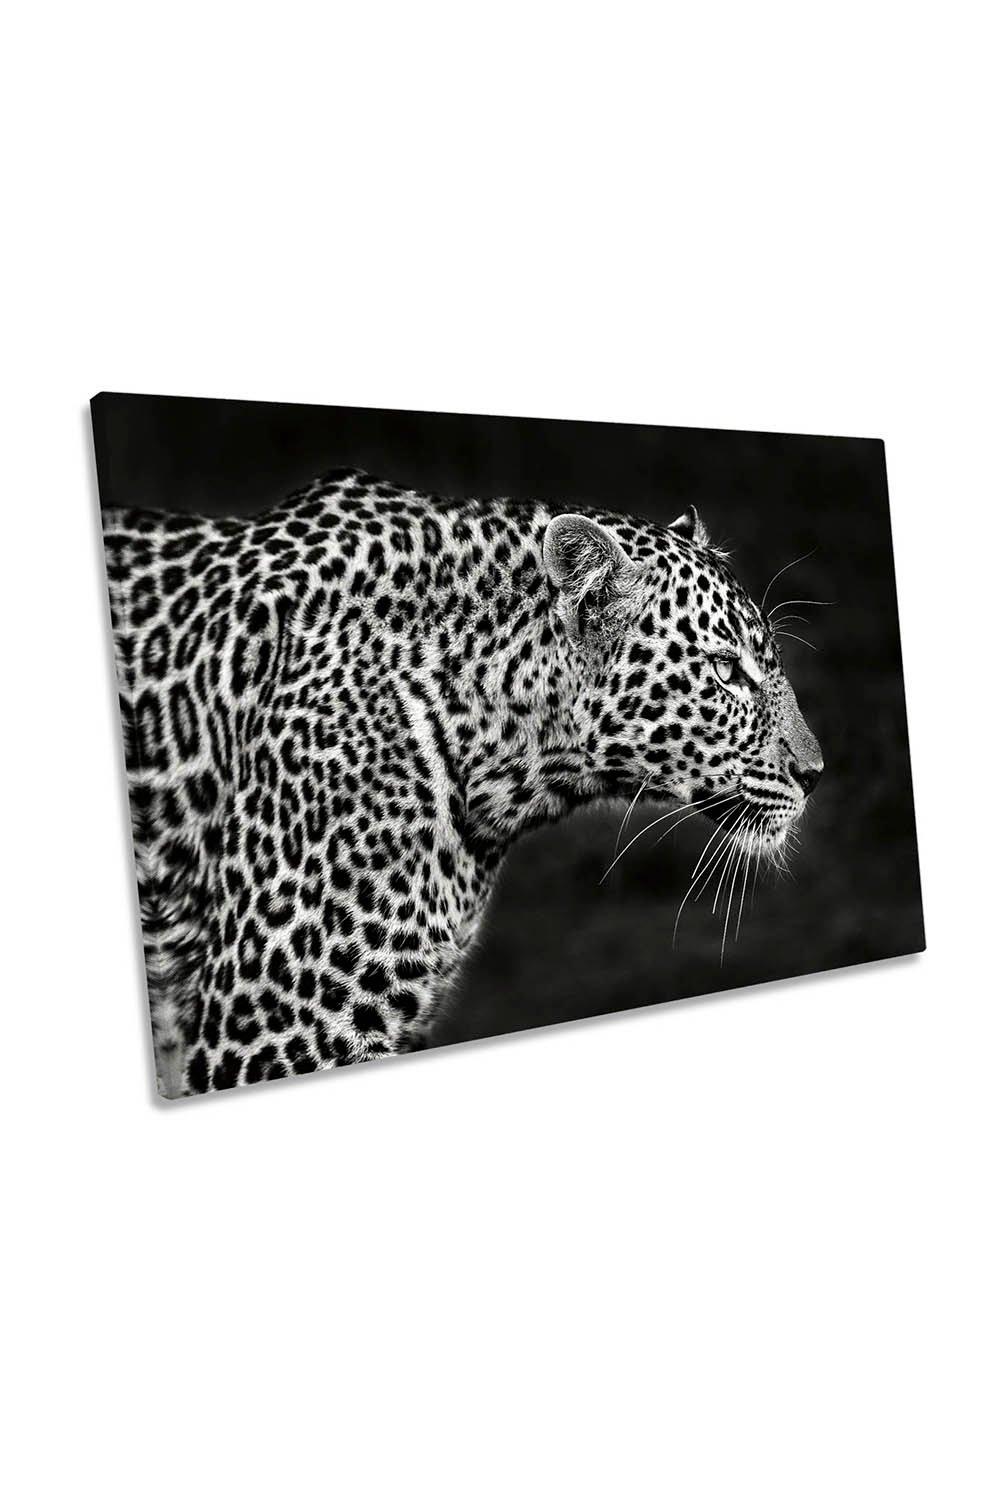 Leopard Close Up Wildlife Animal Canvas Wall Art Picture Print